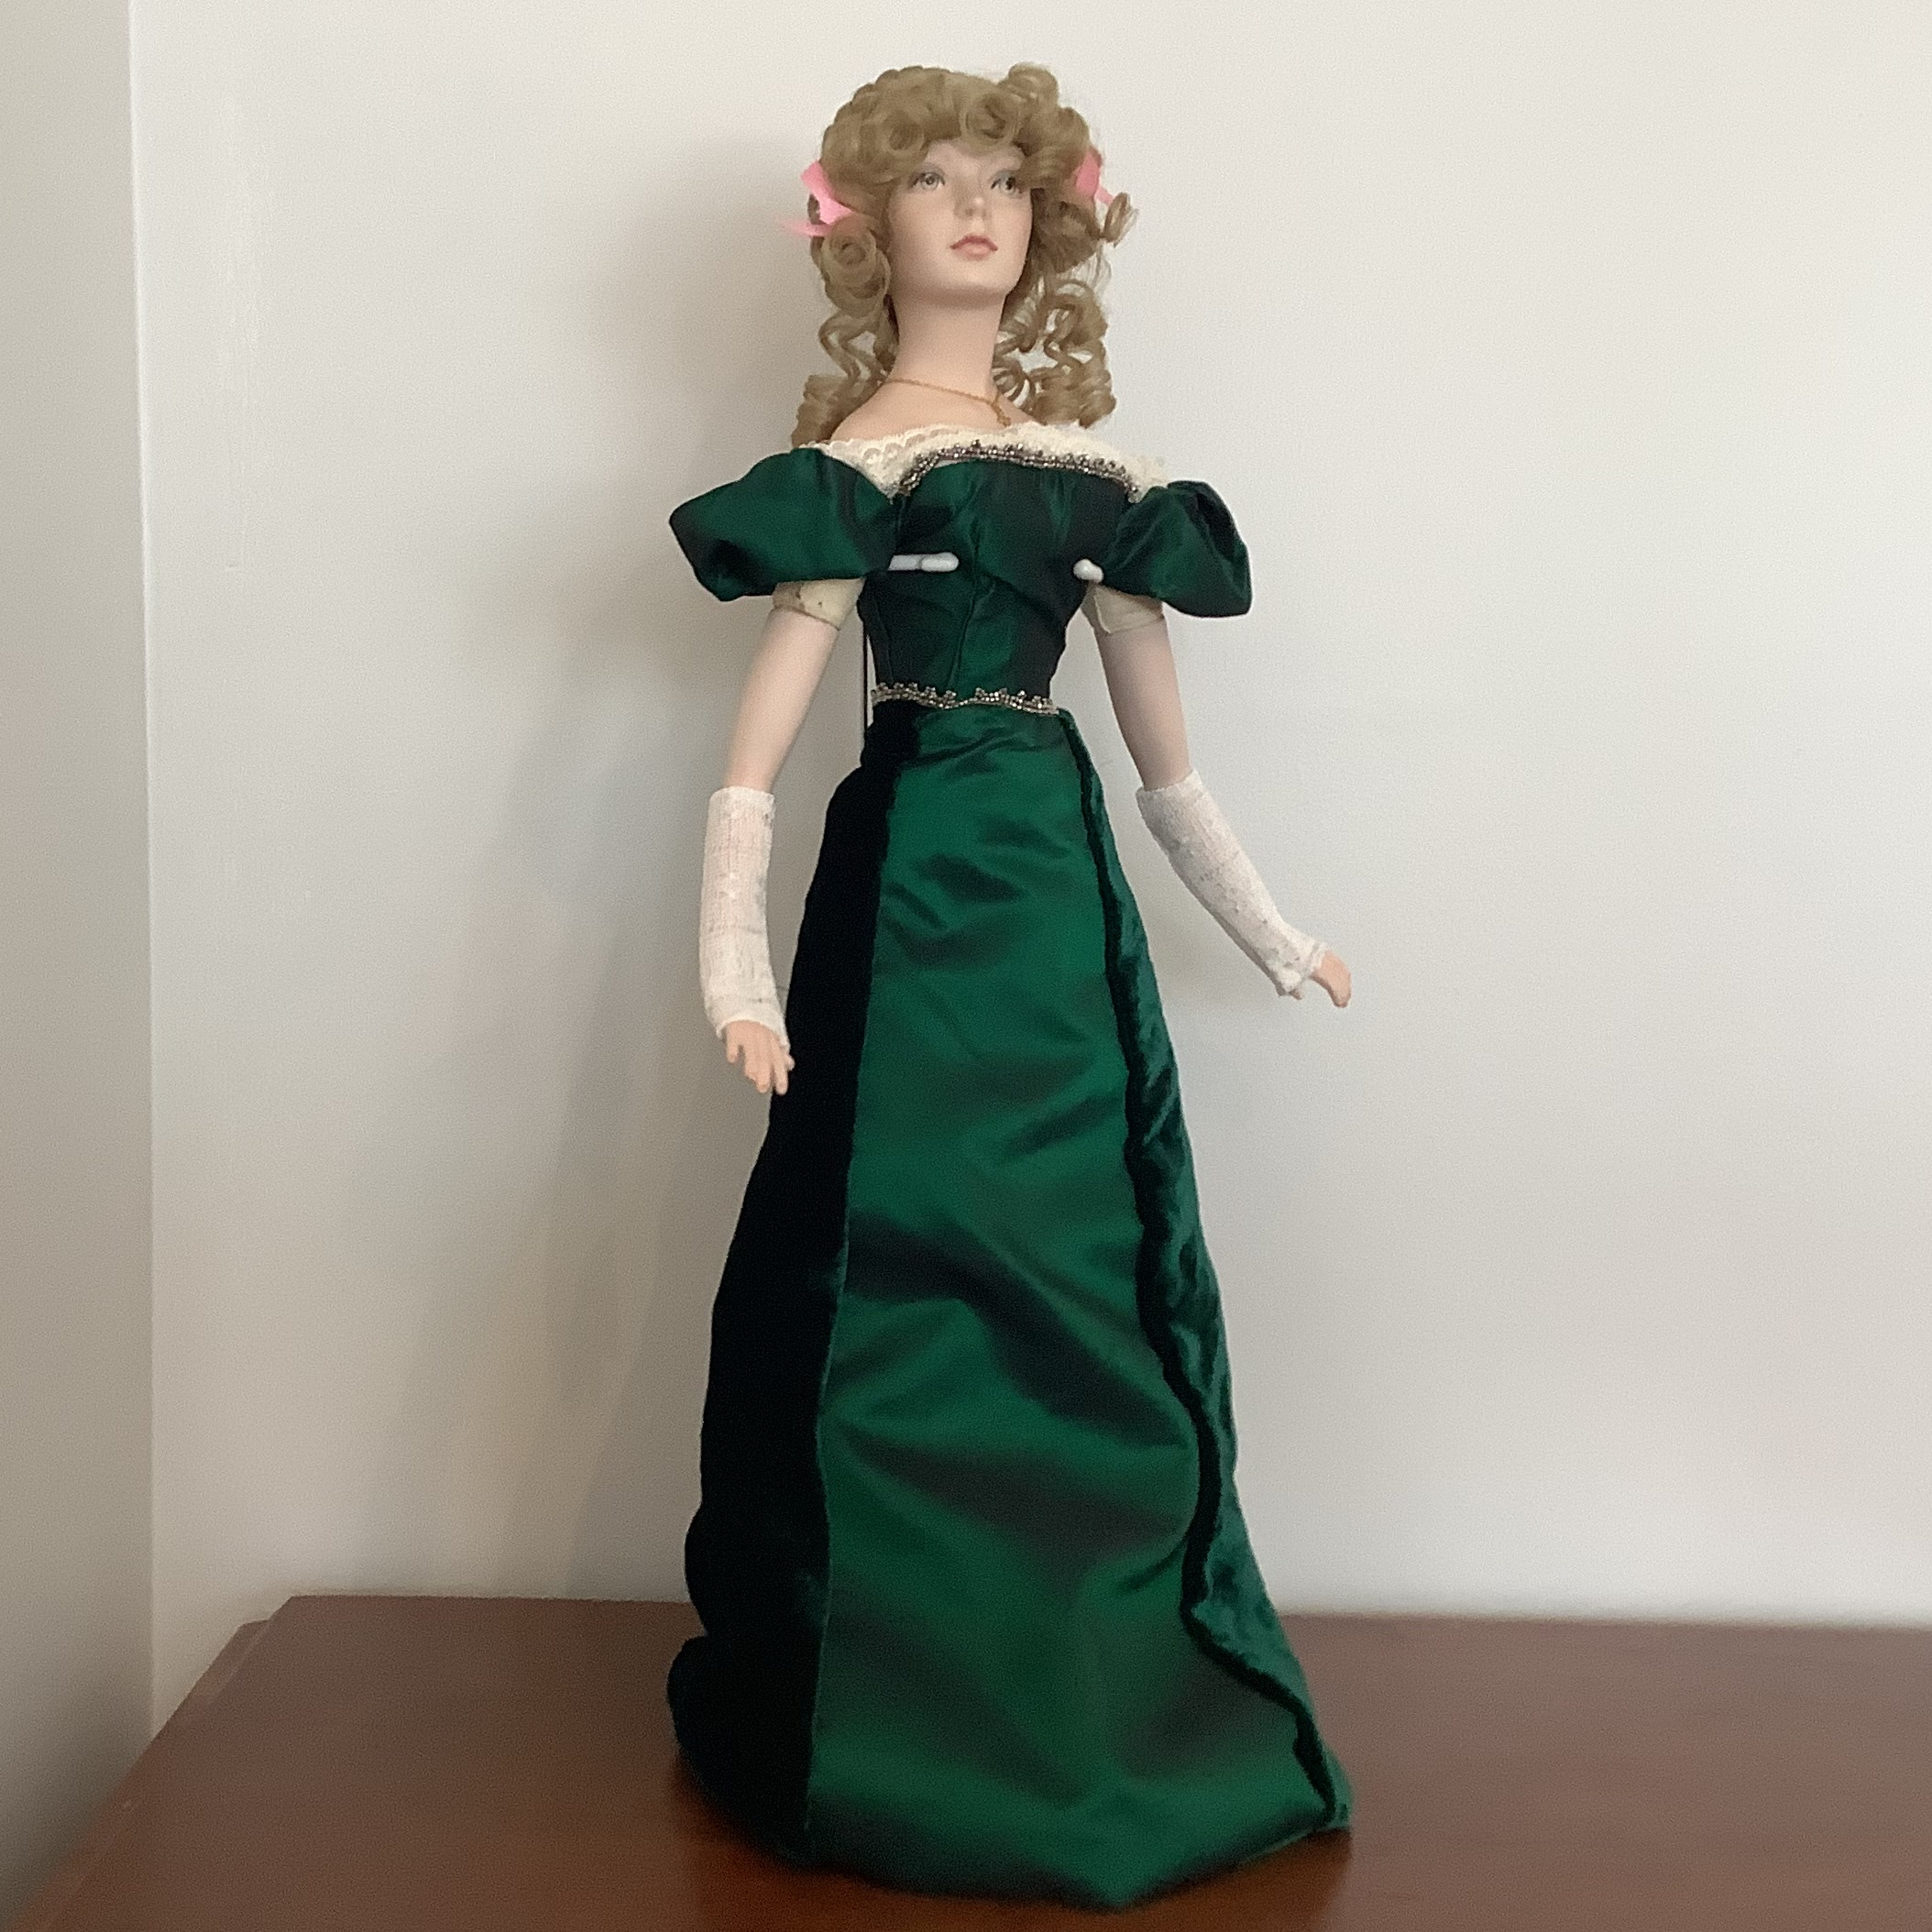 Tall, slim, light-skinned, green-eyed modern lady doll in green dress with curly blond hair and painted green eyes